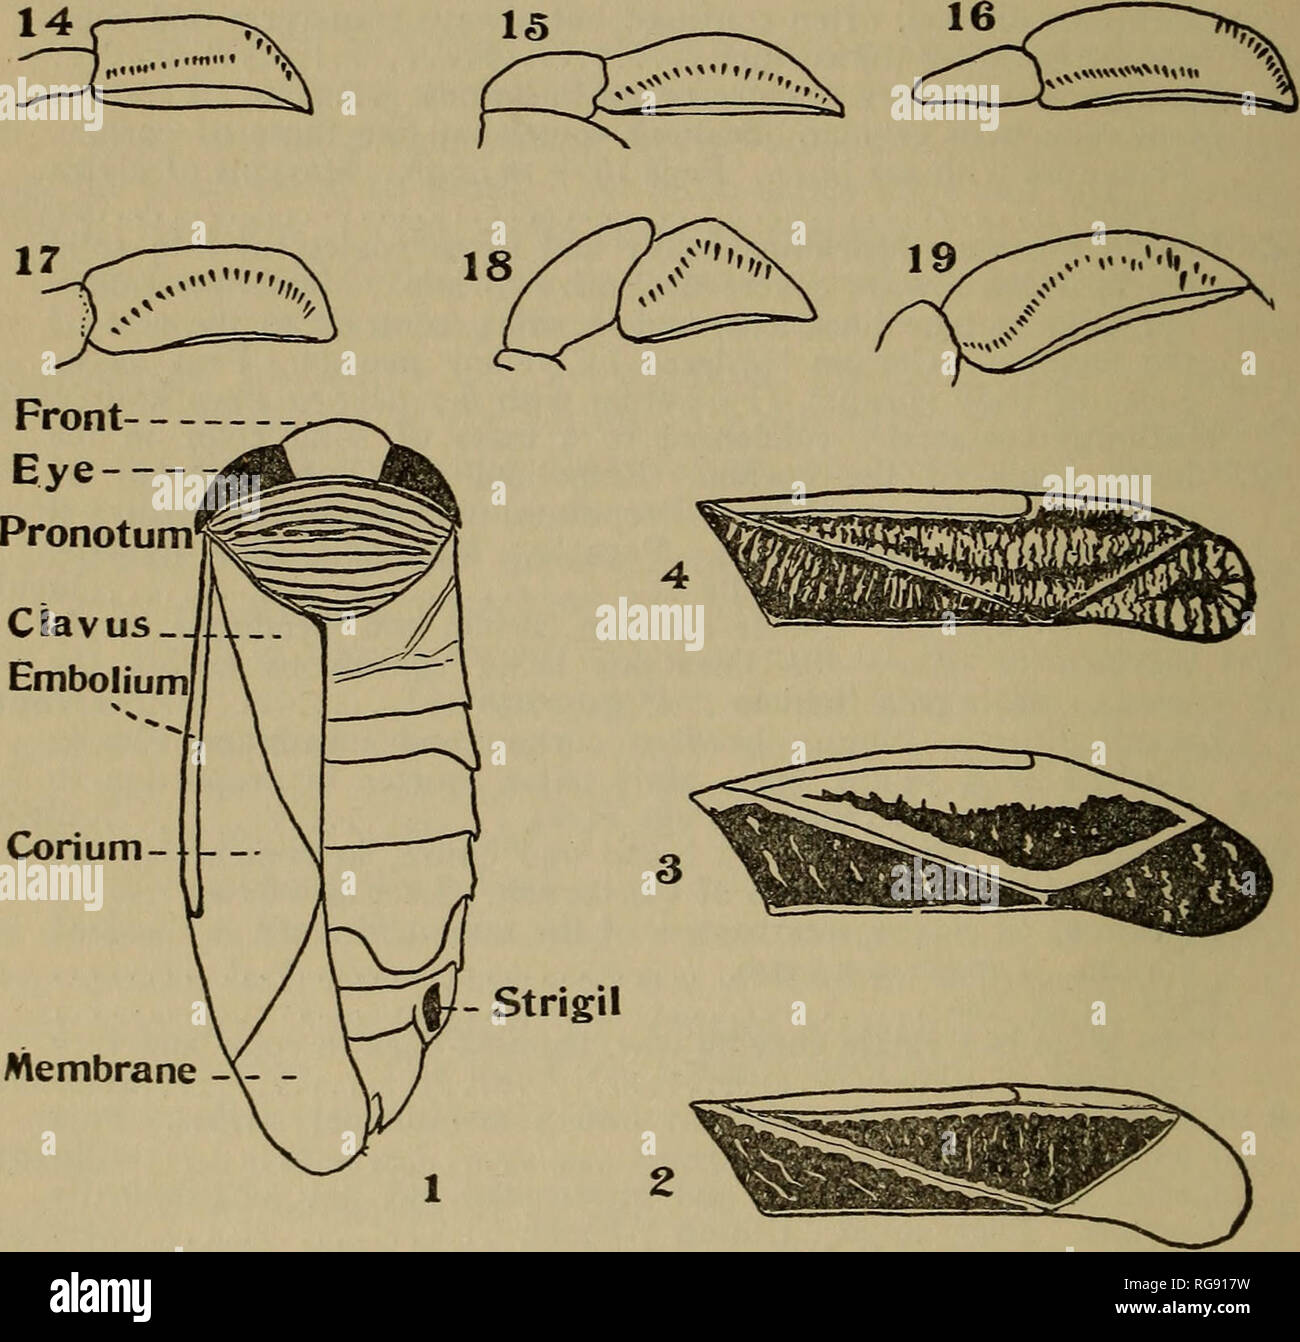 . Bulletin - State Geological and Natural History Survey of Connecticut. Geology; Zoology; Botany; Natural history. Membrane A- - Fig. 36. Corixidae.* (i) Arctocorisa interrupta (Say),—sketch to illus- trate structural parts of a Corixid. The right wing-cover has been removed and the lineations of the other one are omitted for the sake of clearness. (2) Arctocorisa kennicottii (Uhler),—right wing-cover. (3) Arctocorisa lucida Abbott,—right wing-cover. (4) Arctocorisa ornata Abbott,—right wing-cover. (5) Arctocorisa interrupta (Say),—fore tarsus of male. (6) Arctocorisa nitida (Fieber),—fore ta Stock Photo